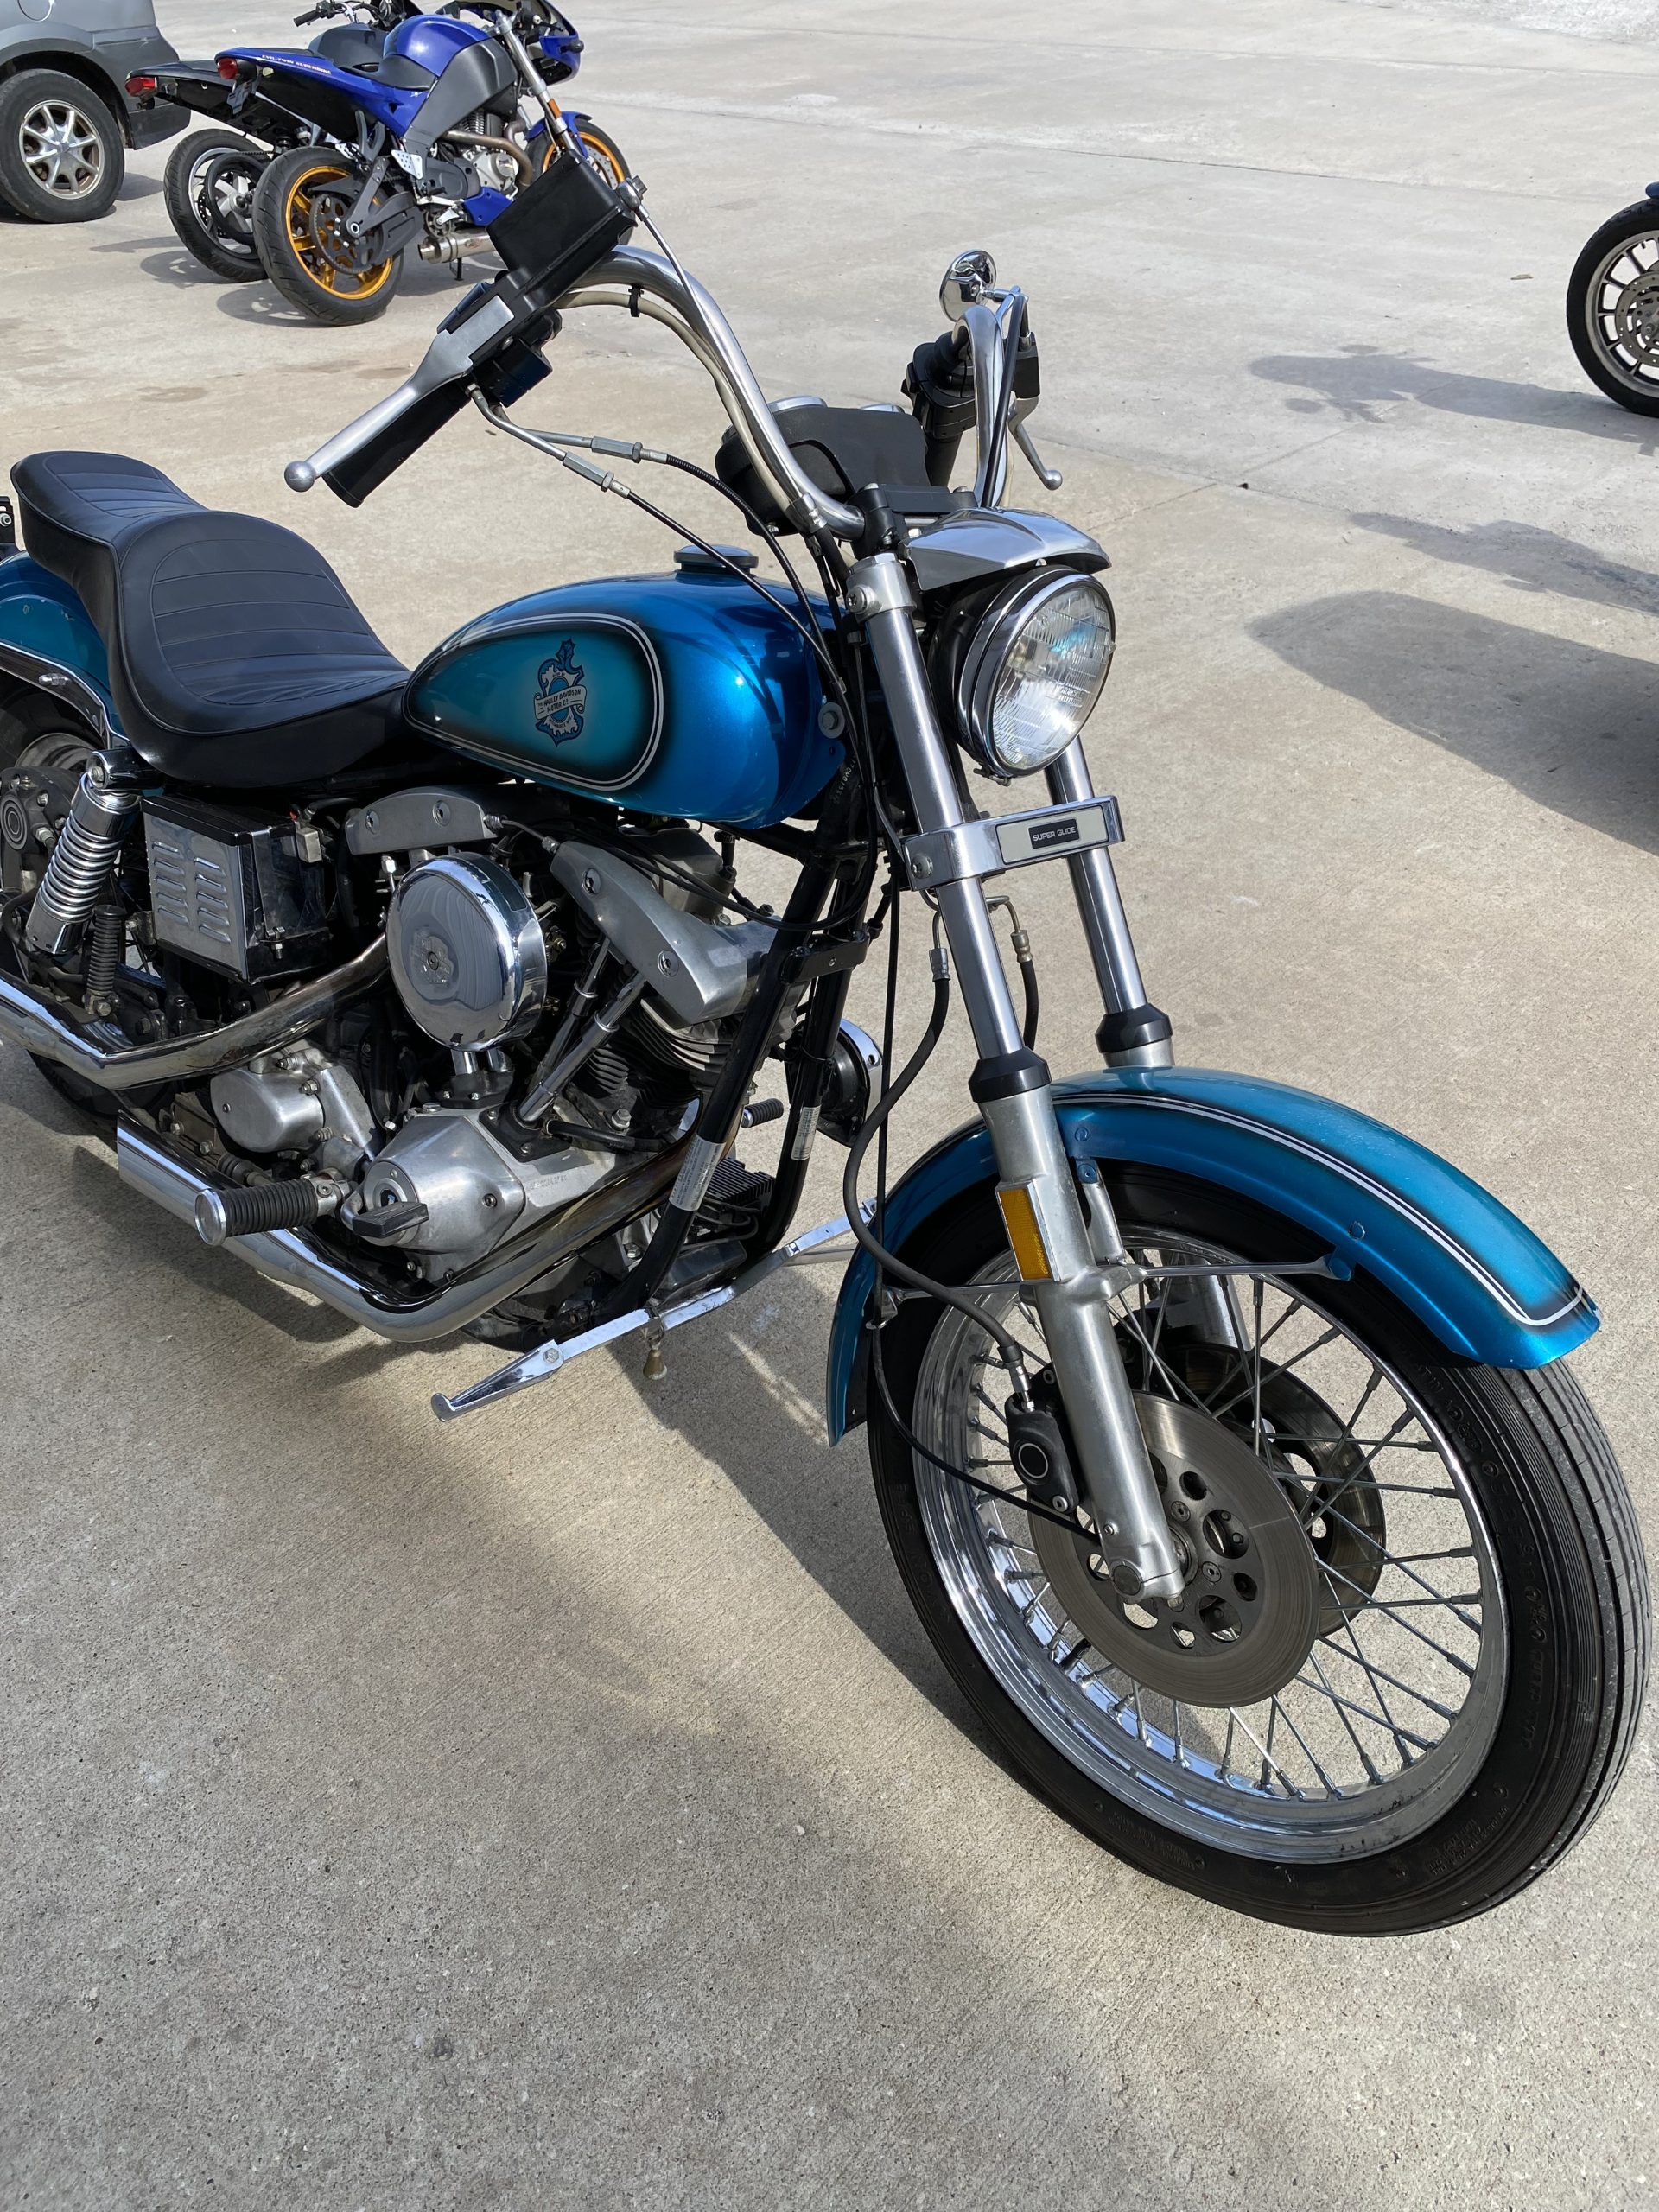 1982 Harley Davidson FXE, Vintage 1982 Harley Davidson FXE for Sale at Knobtown Cycle &#8211; Unbeatable Price of $10,500!, Knobtown Cycle